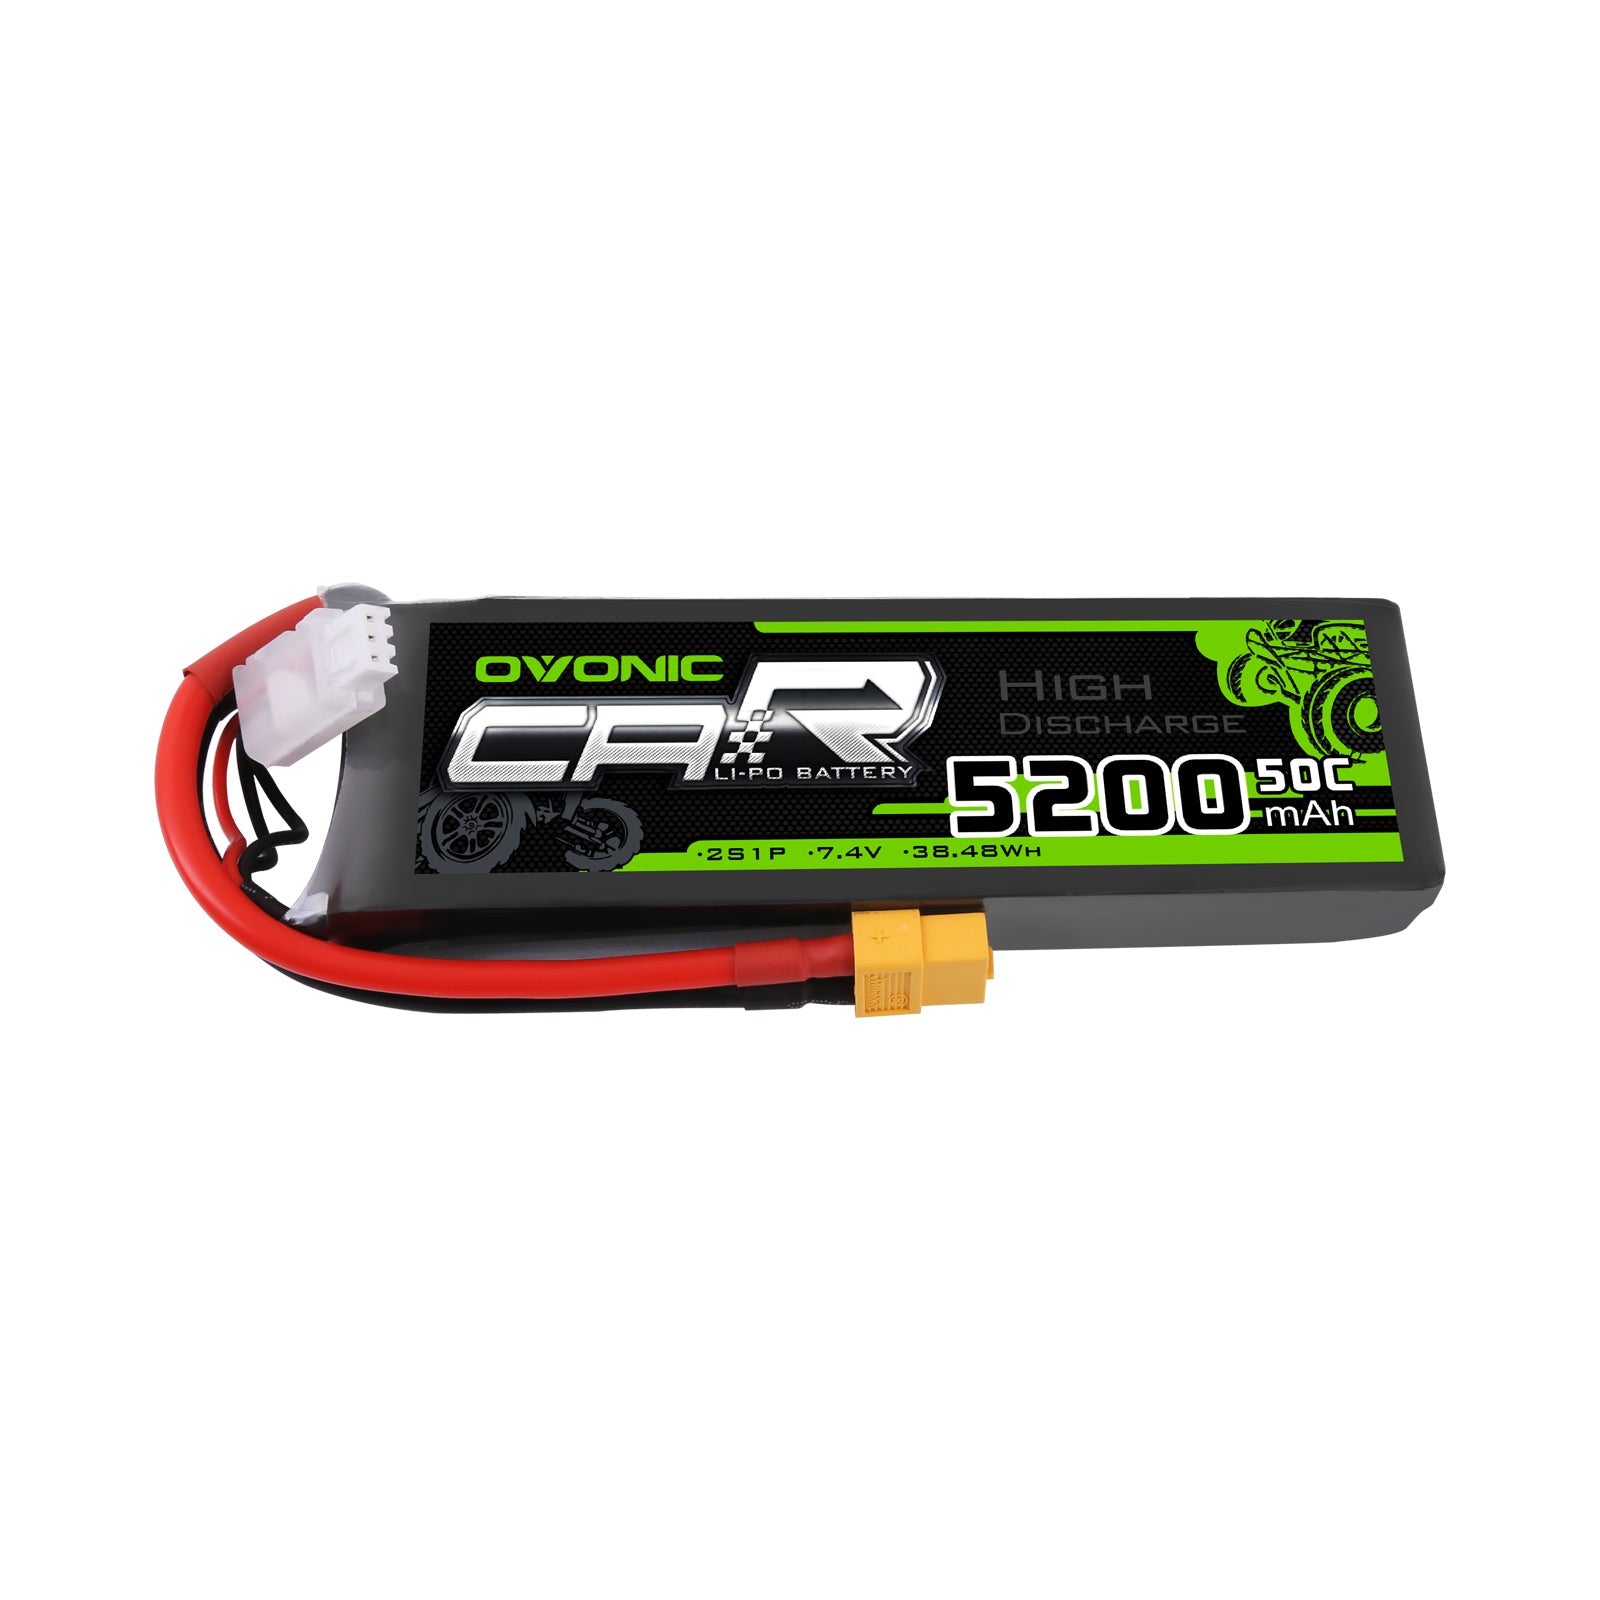 OVONIC 7.4V 5200mAh 2S 50C LiPo Battery Pack with XT60 Plug for RC cars - Ampow